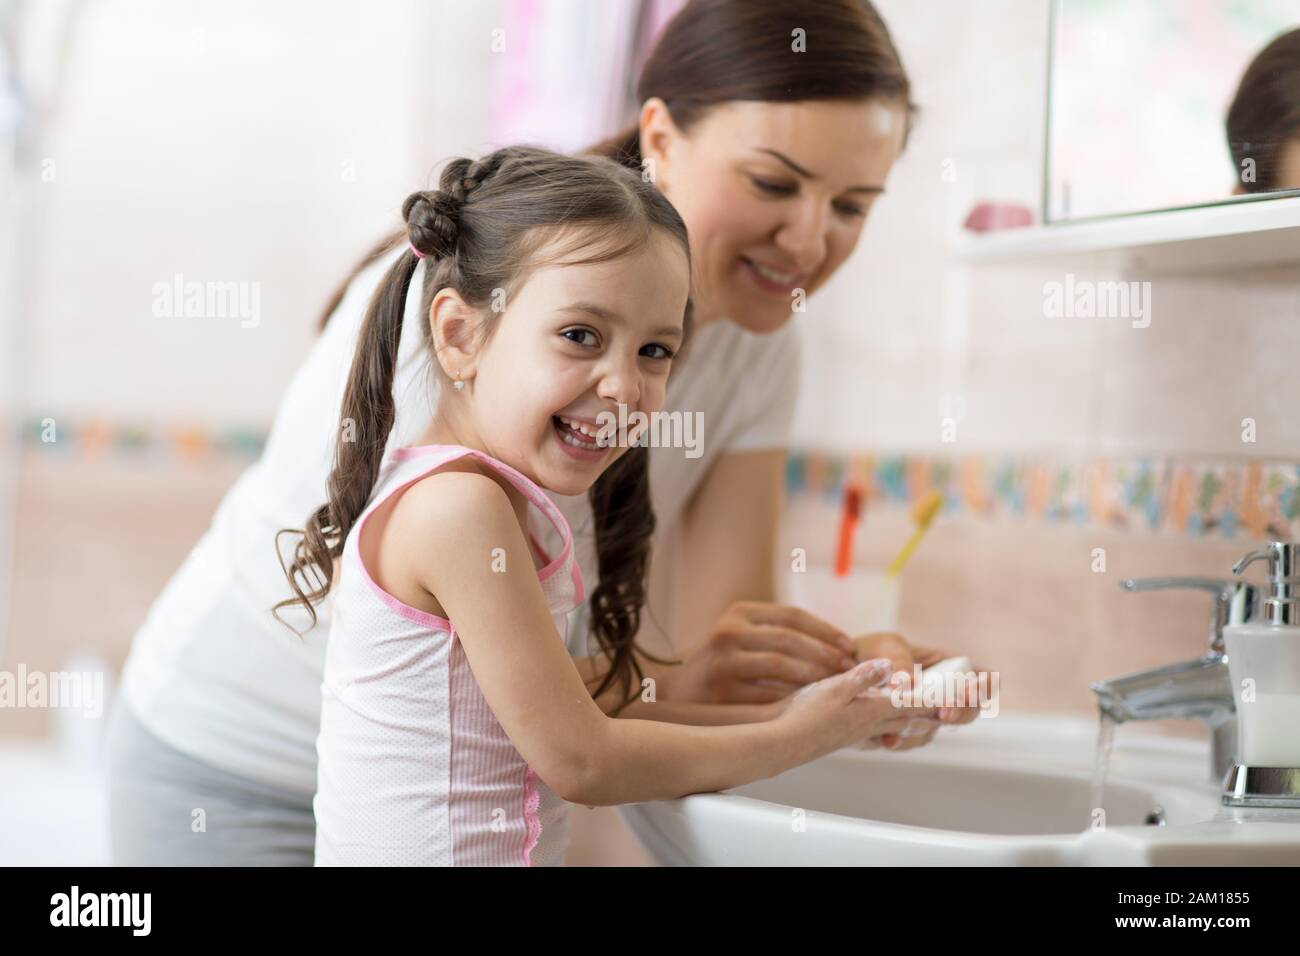 Woman and her daughter child washing hands with soap in bathroom Stock Photo